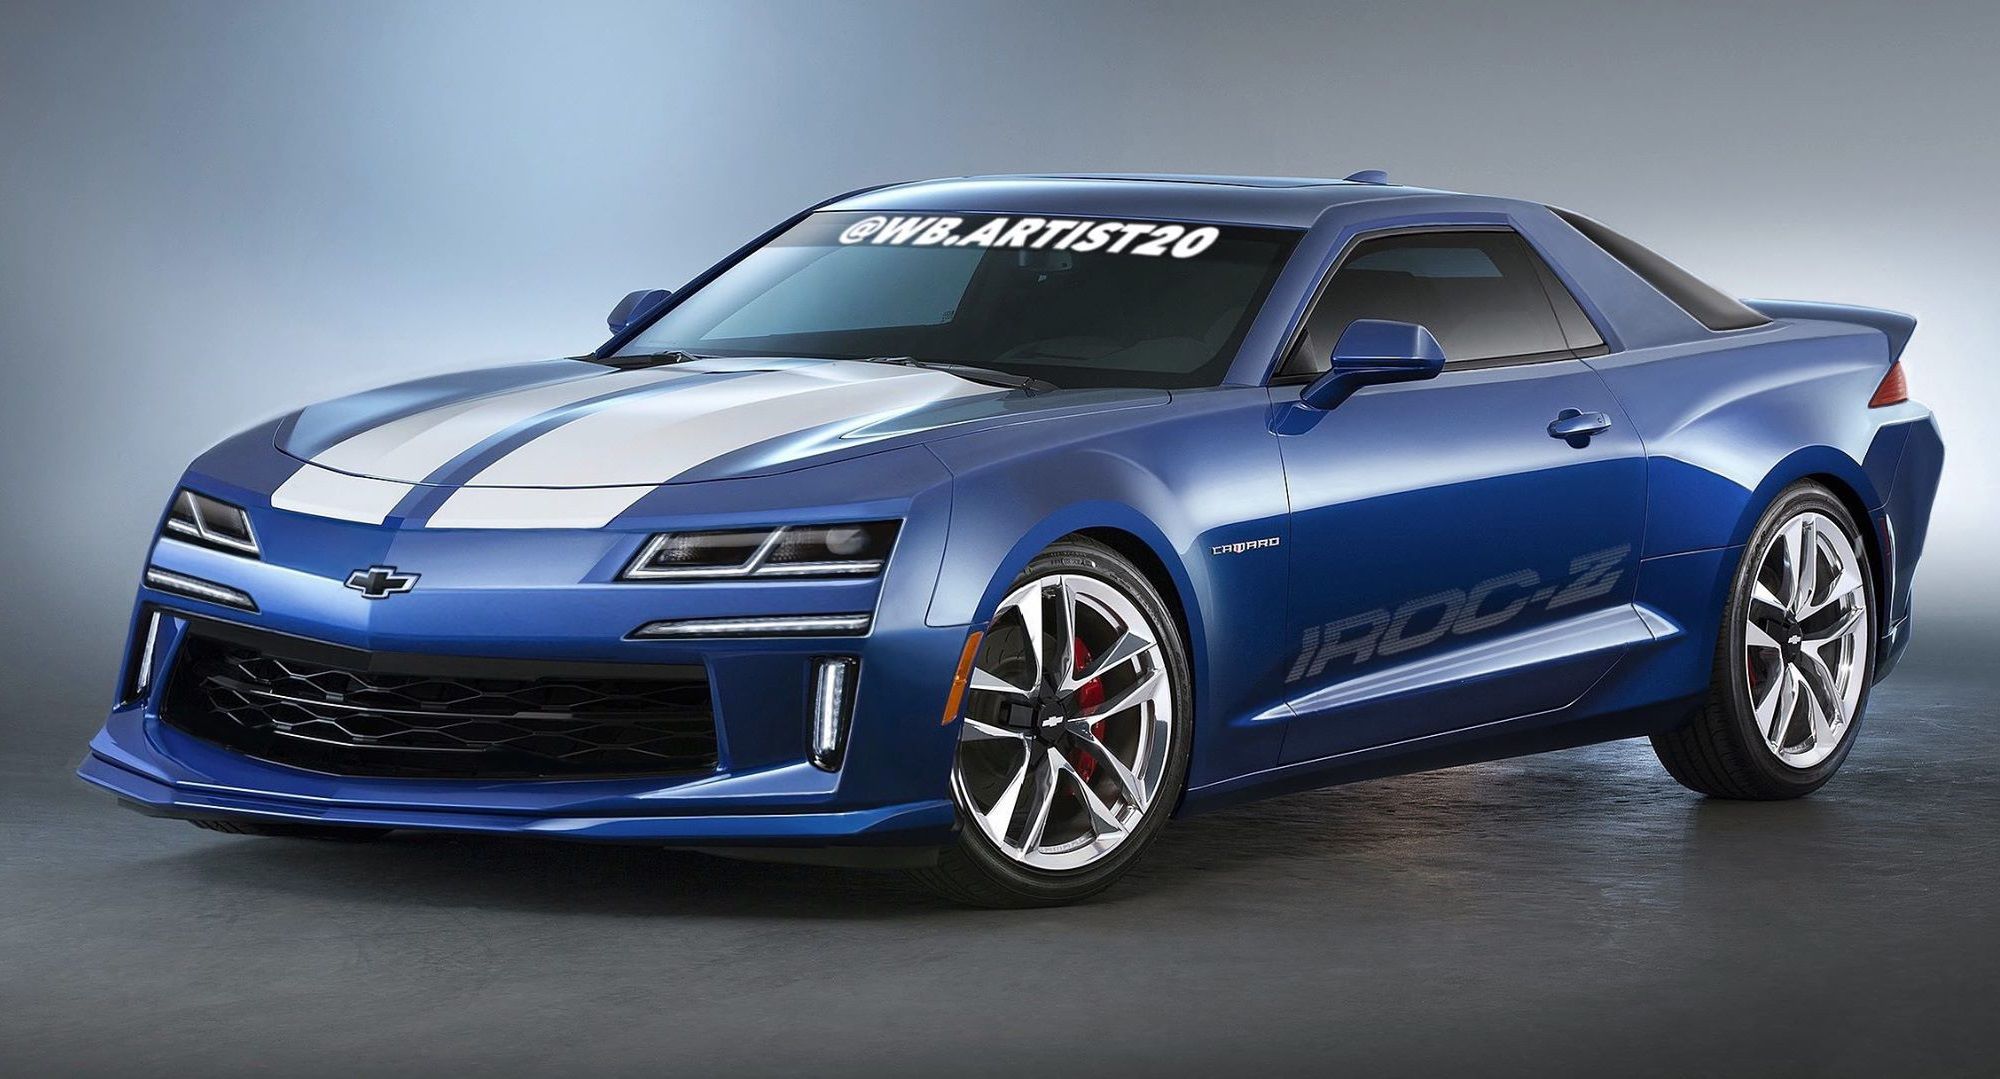 This Rendering of a Modern Chevy Camaro IROCZ Is More Evidence That GM